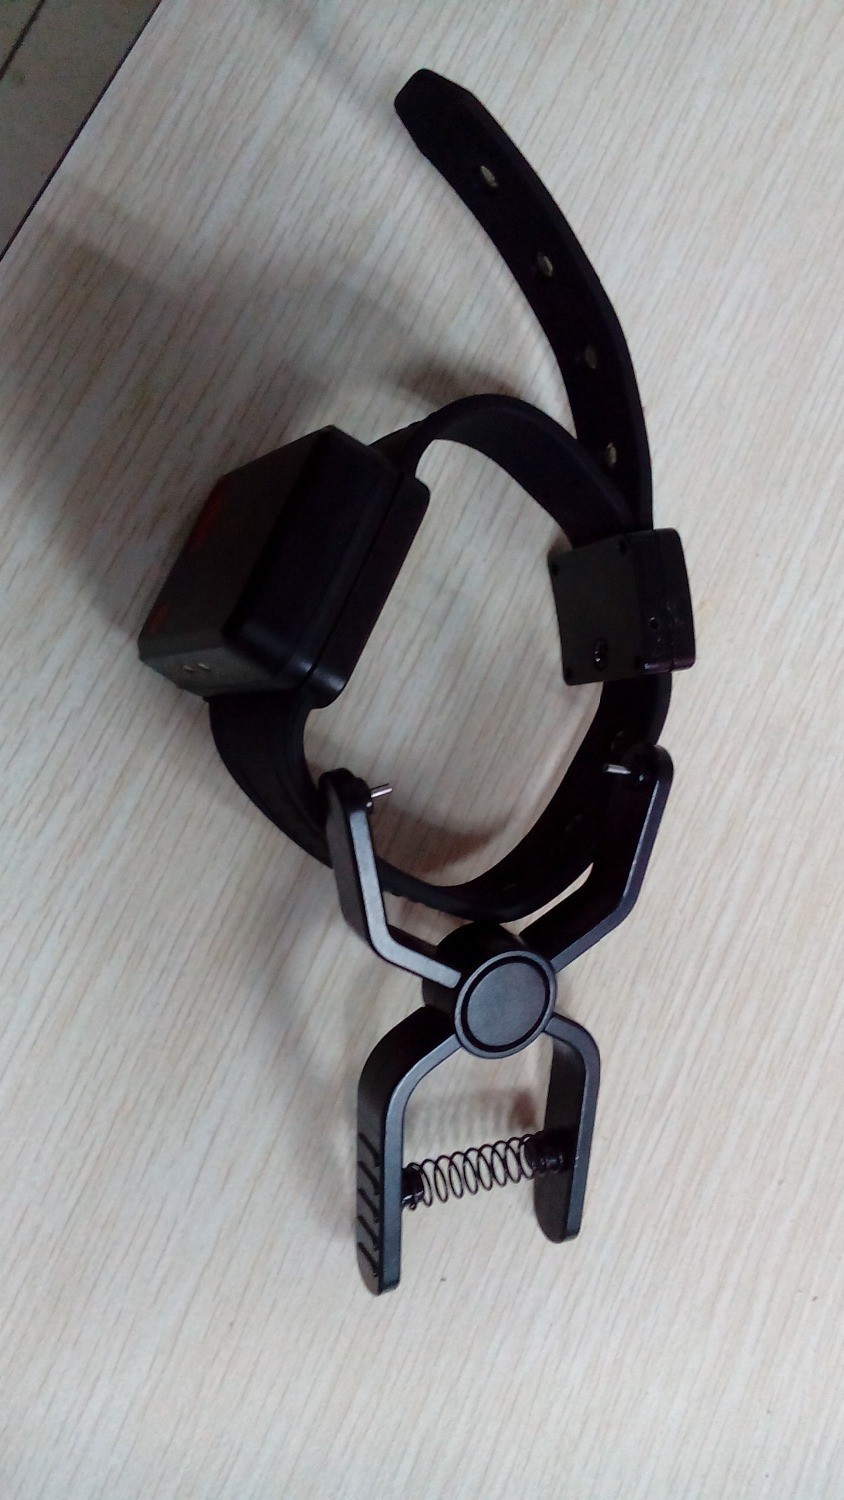 gps-personal-tracker-MT60X-bracelet-GPS-tracker-with-strap-for-offender-prisoners-inmates-parolees-mini-gps (1)